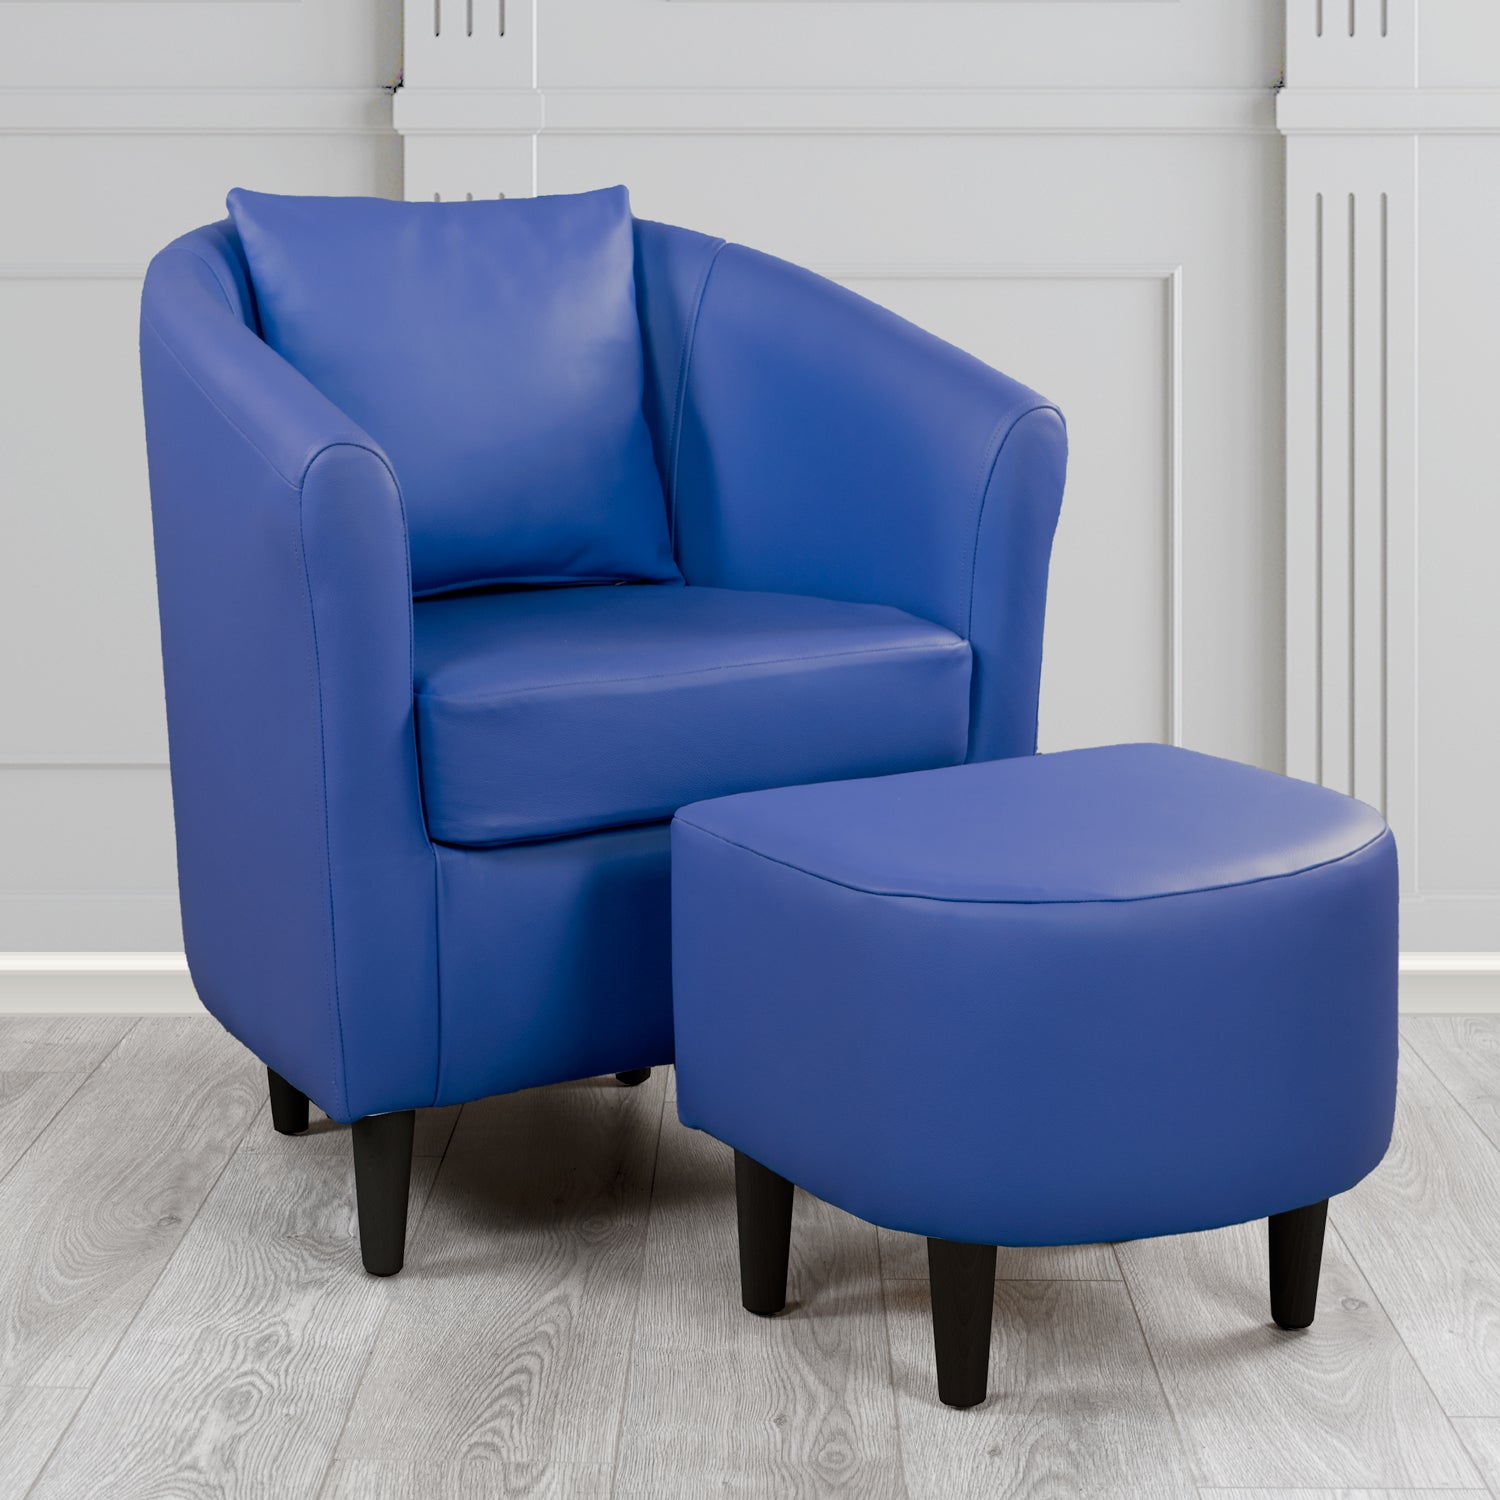 St Tropez Shelly Deep Ultramarine Crib 5 Genuine Leather Tub Chair & Footstool Set With Scatter Cushion (6619484913706)